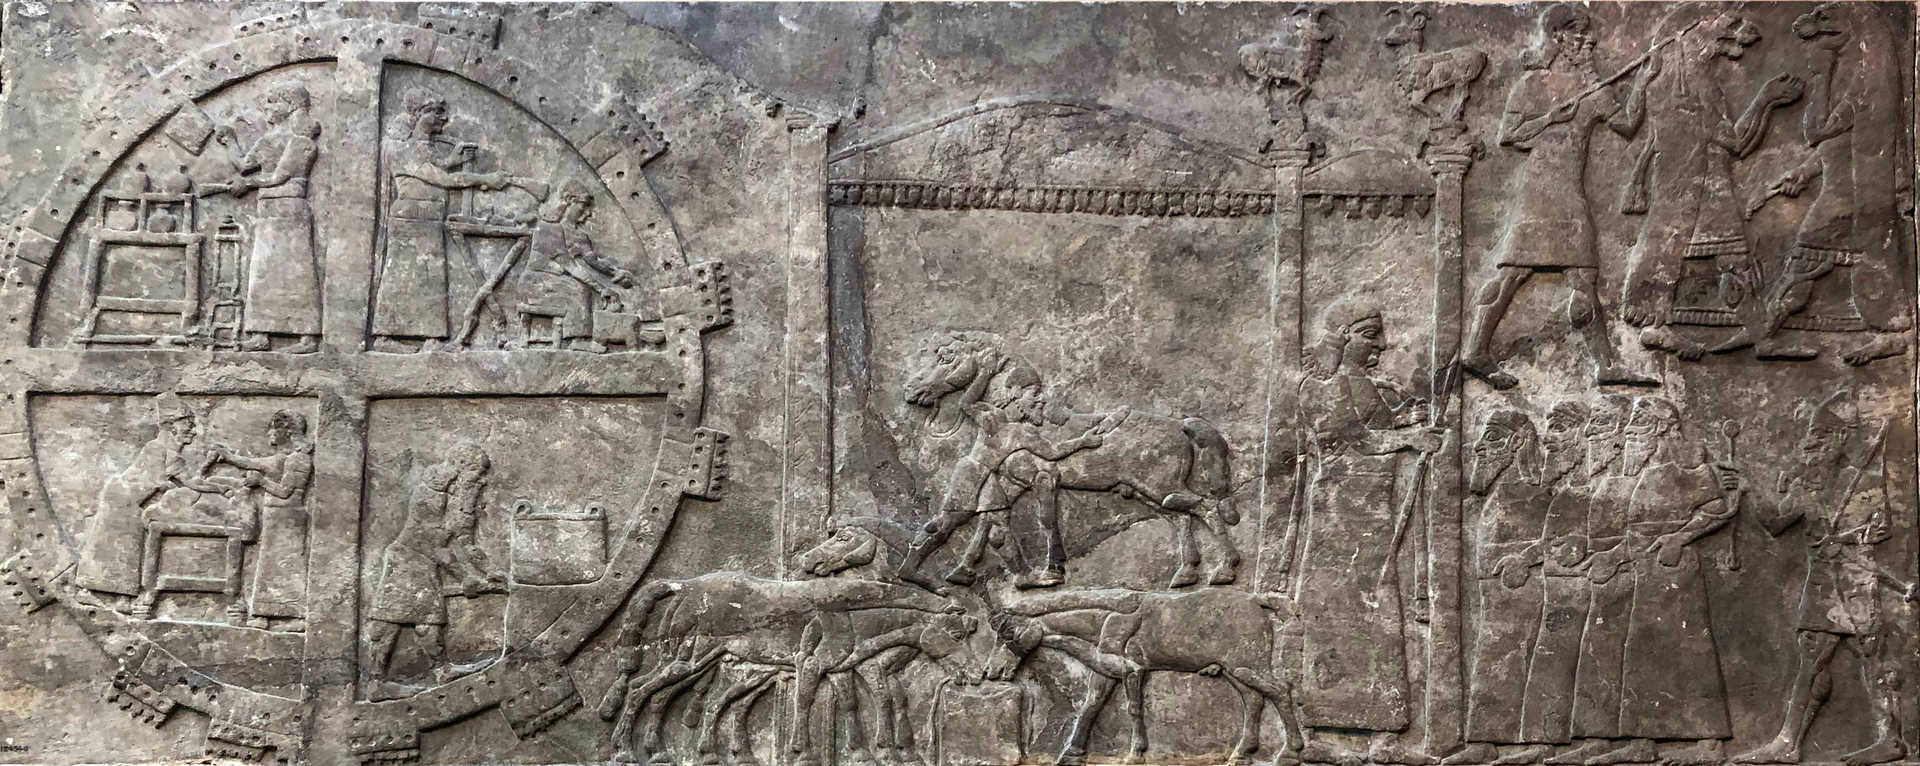 Bas-relief in British Museum of ancient Assyrian workers. Photographer: Sanjar Alimov (2018). License: Creative Commons Attribution-Share Alike 4.0 International — https://creativecommons.org/licenses/by-sa/4.0/deed.en. Photo cropped slightly and color adjusted for this use.